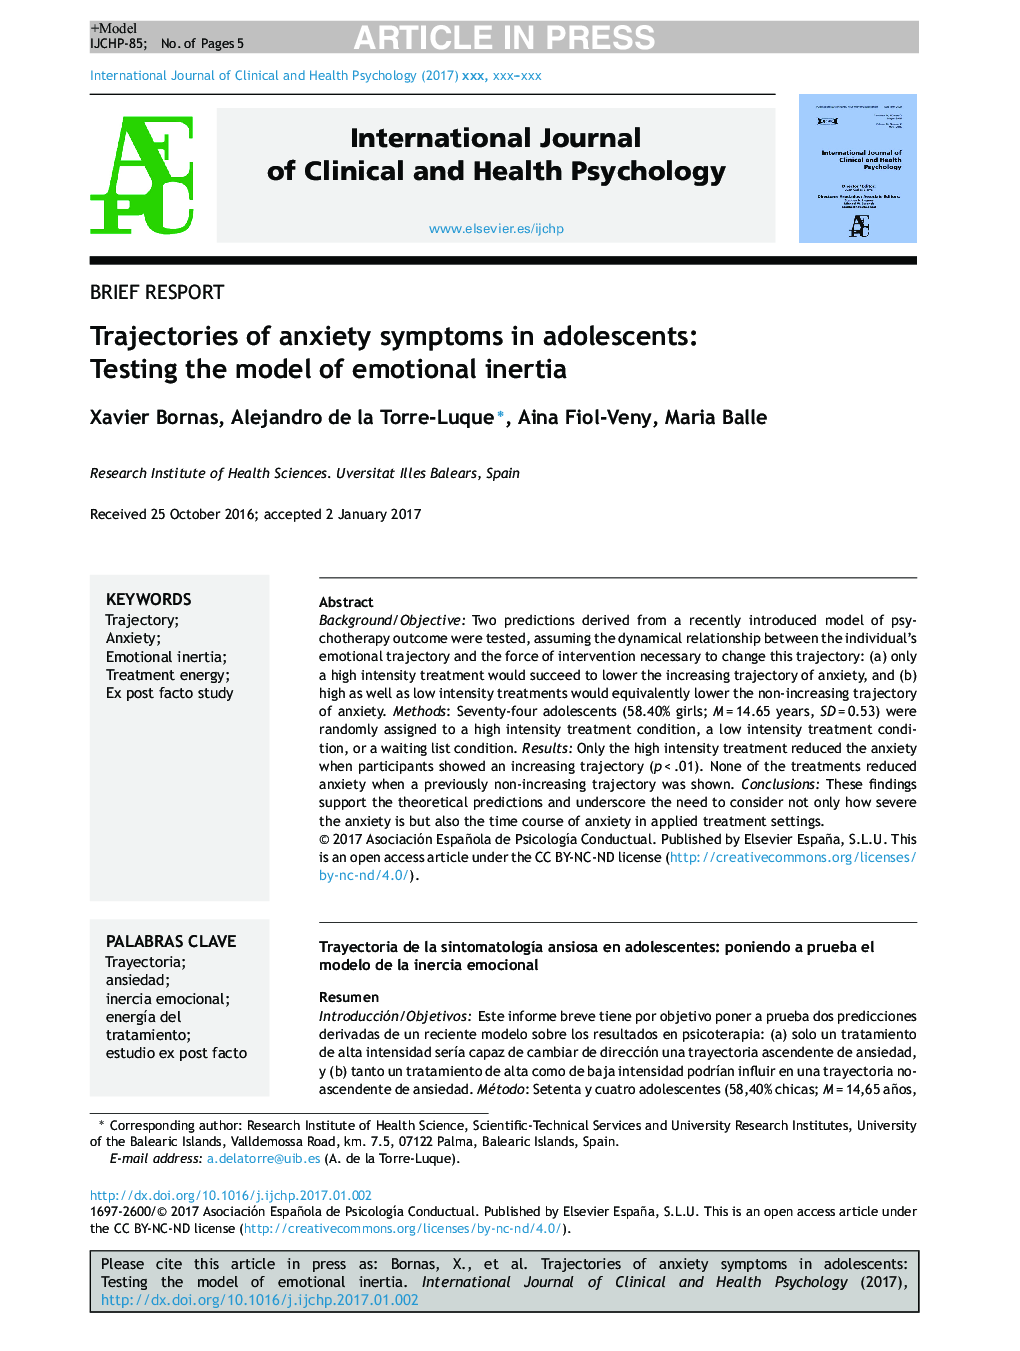 Trajectories of anxiety symptoms in adolescents: Testing the model of emotional inertia